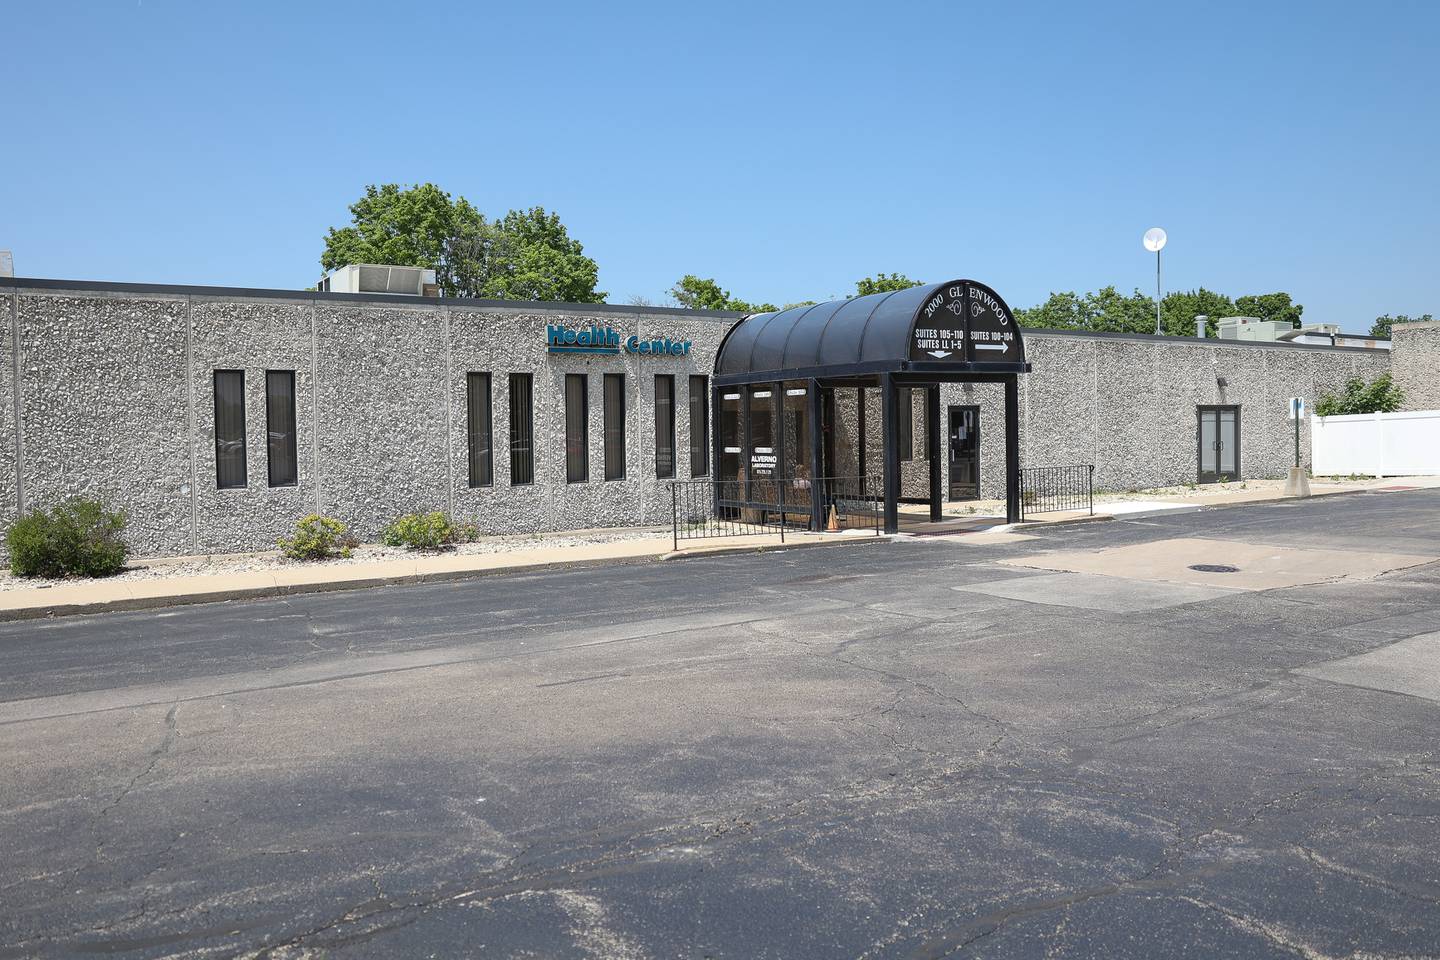 Trinity Services, Inc. recently purchase the 2000 Glenwood building and opened The Living Room in Joliet, located in Suites LL 1-5, providing mental health crisis support and services.